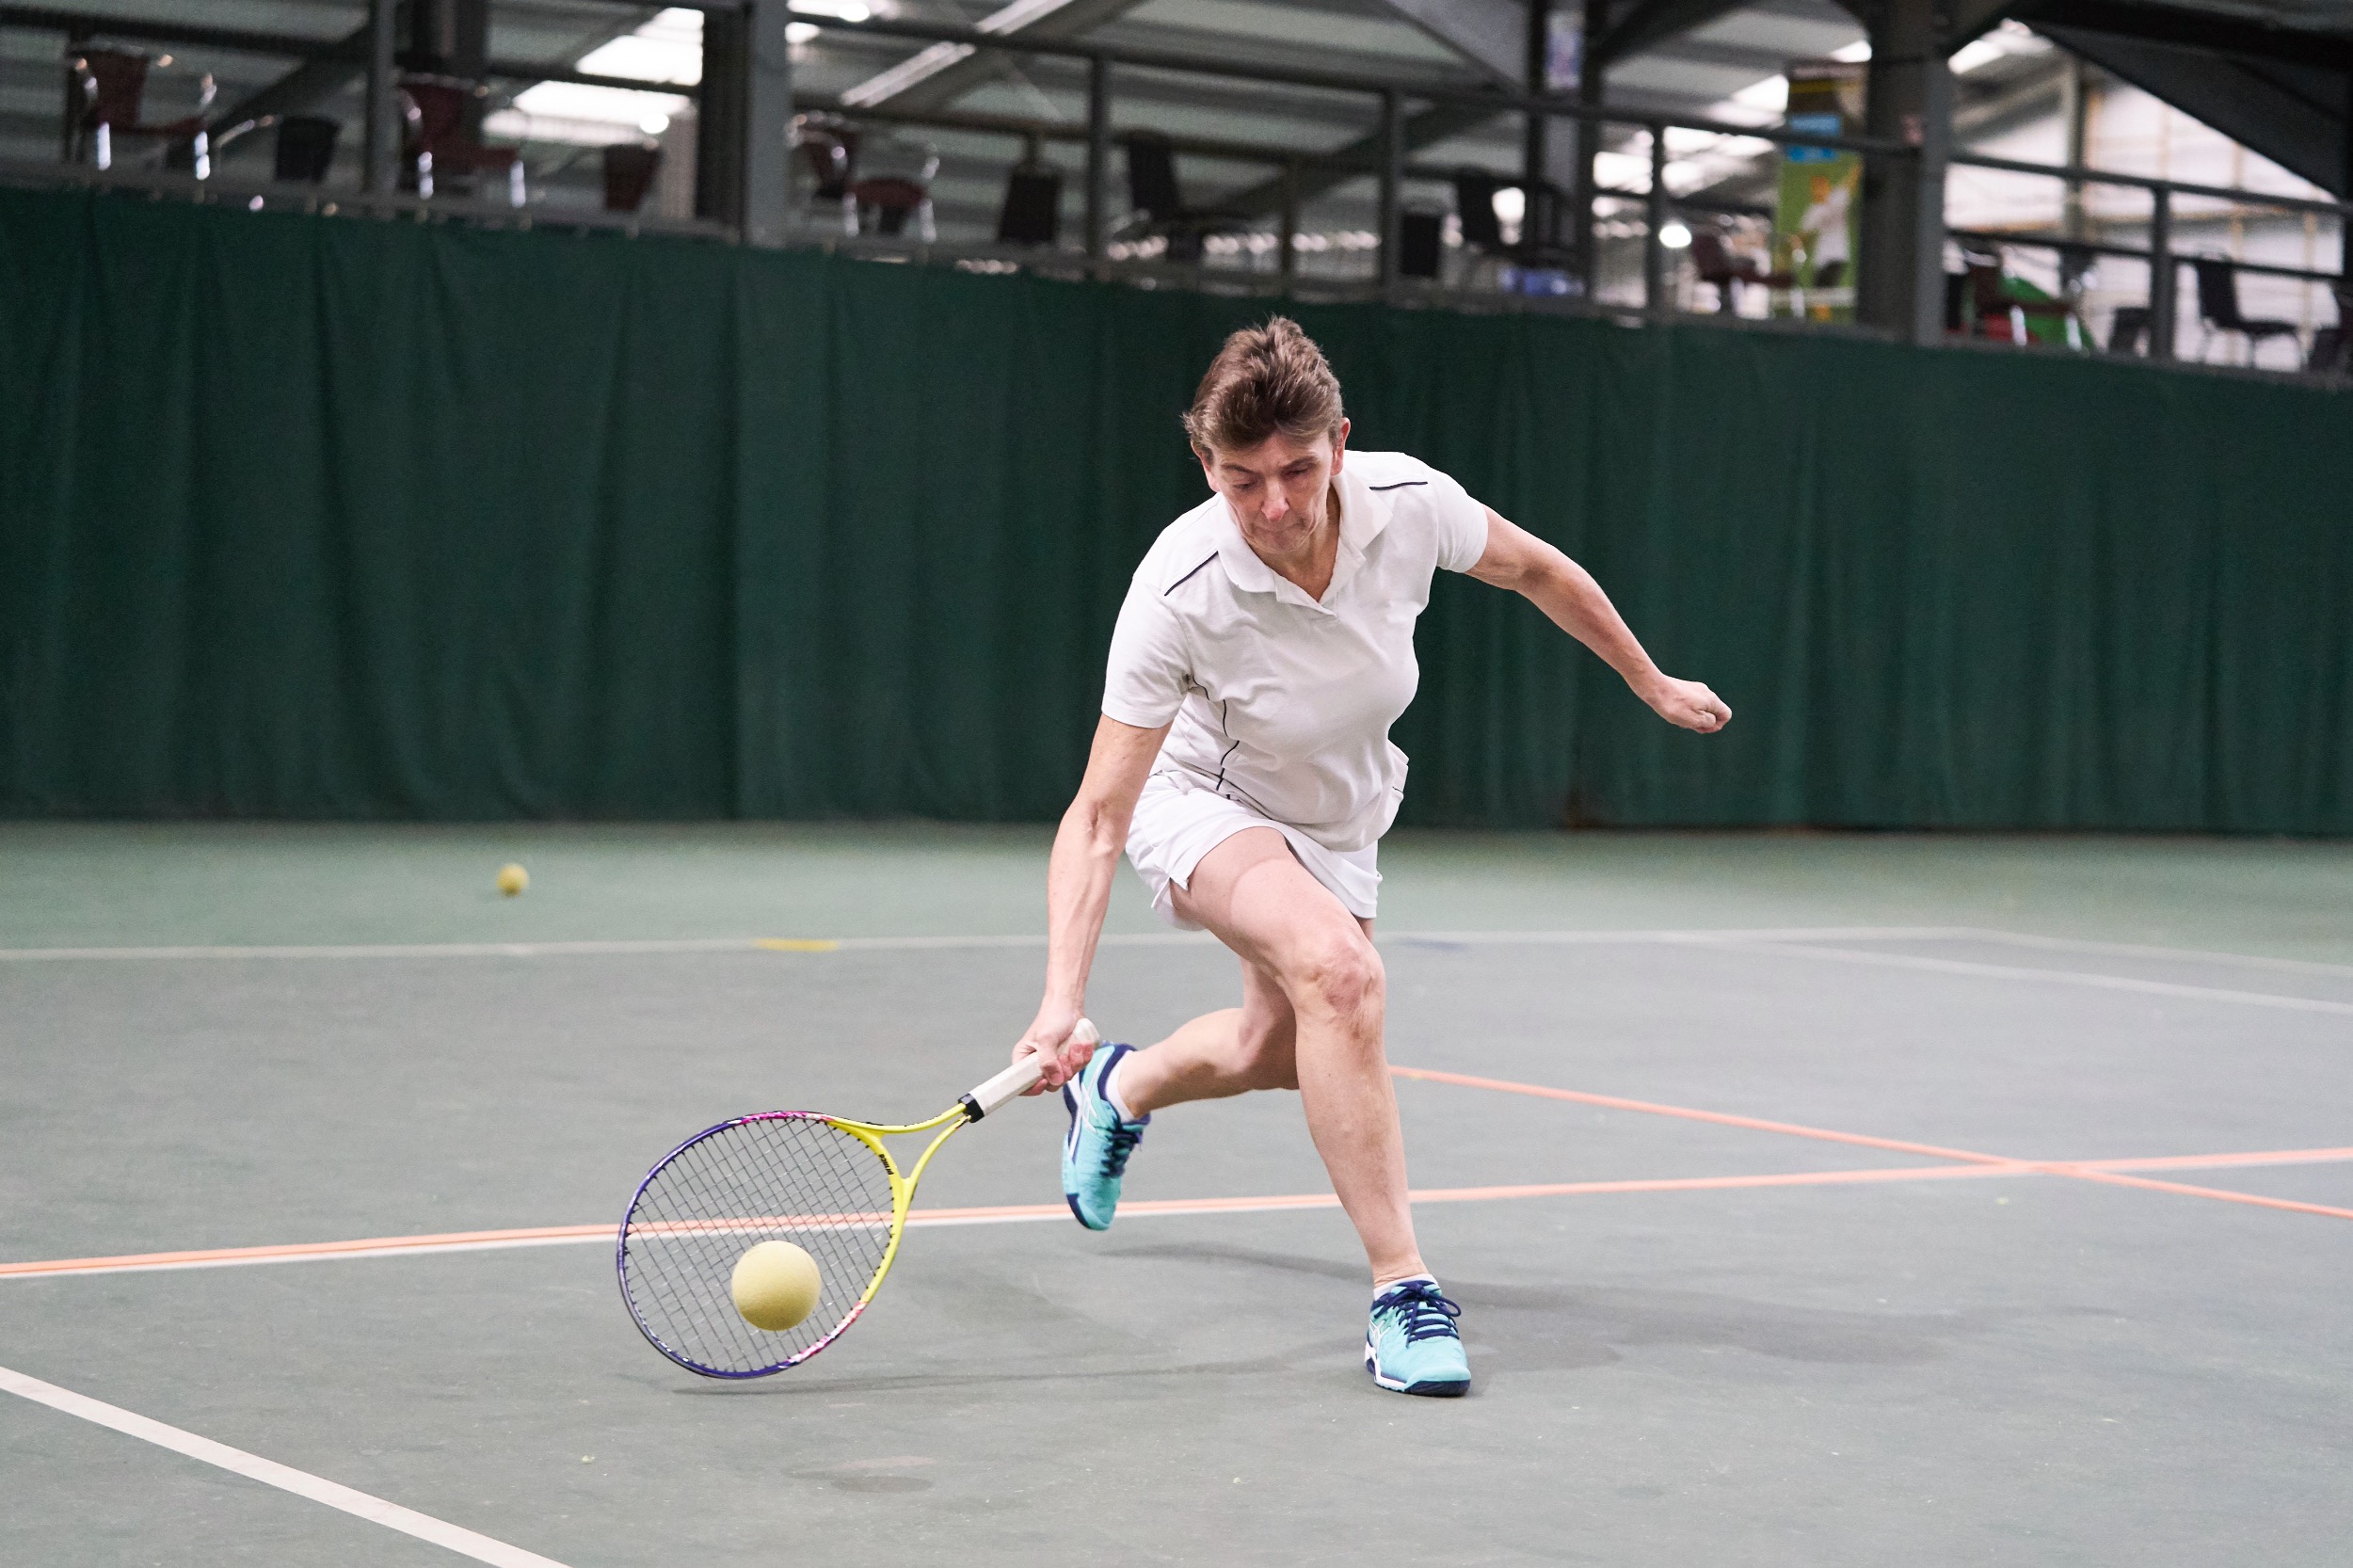 New visually impaired tennis group in Birmingham